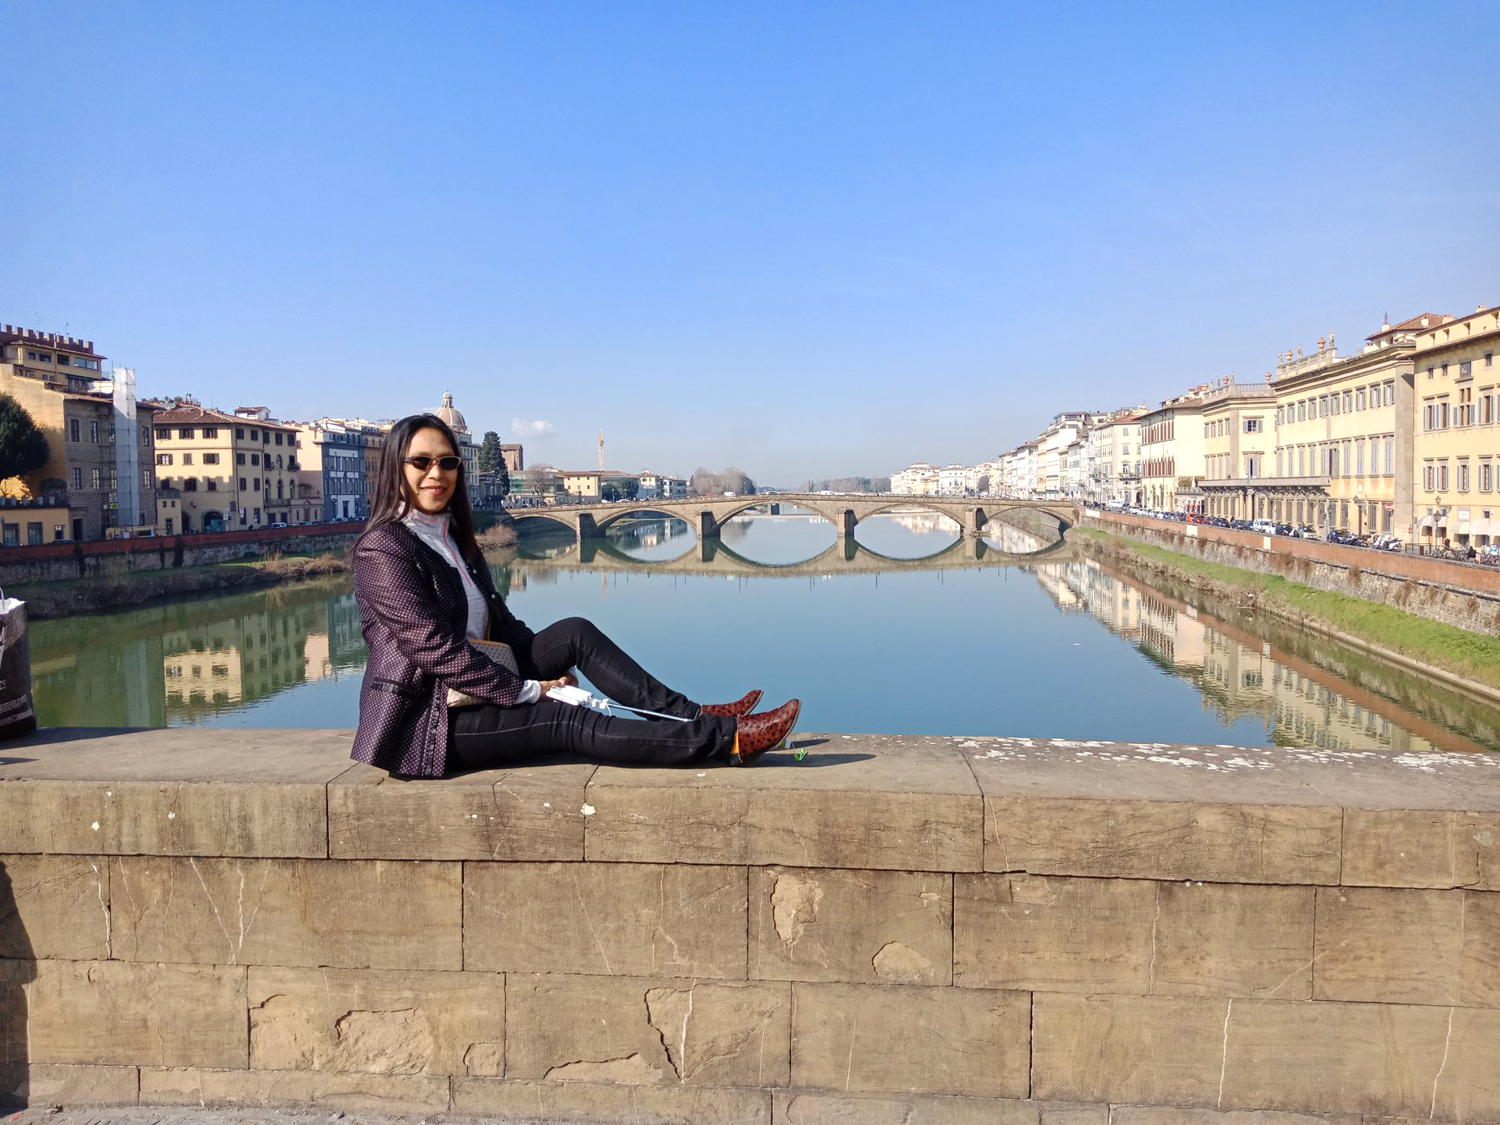 Day 06 -  Hotel Stay in Florence  (1 night)